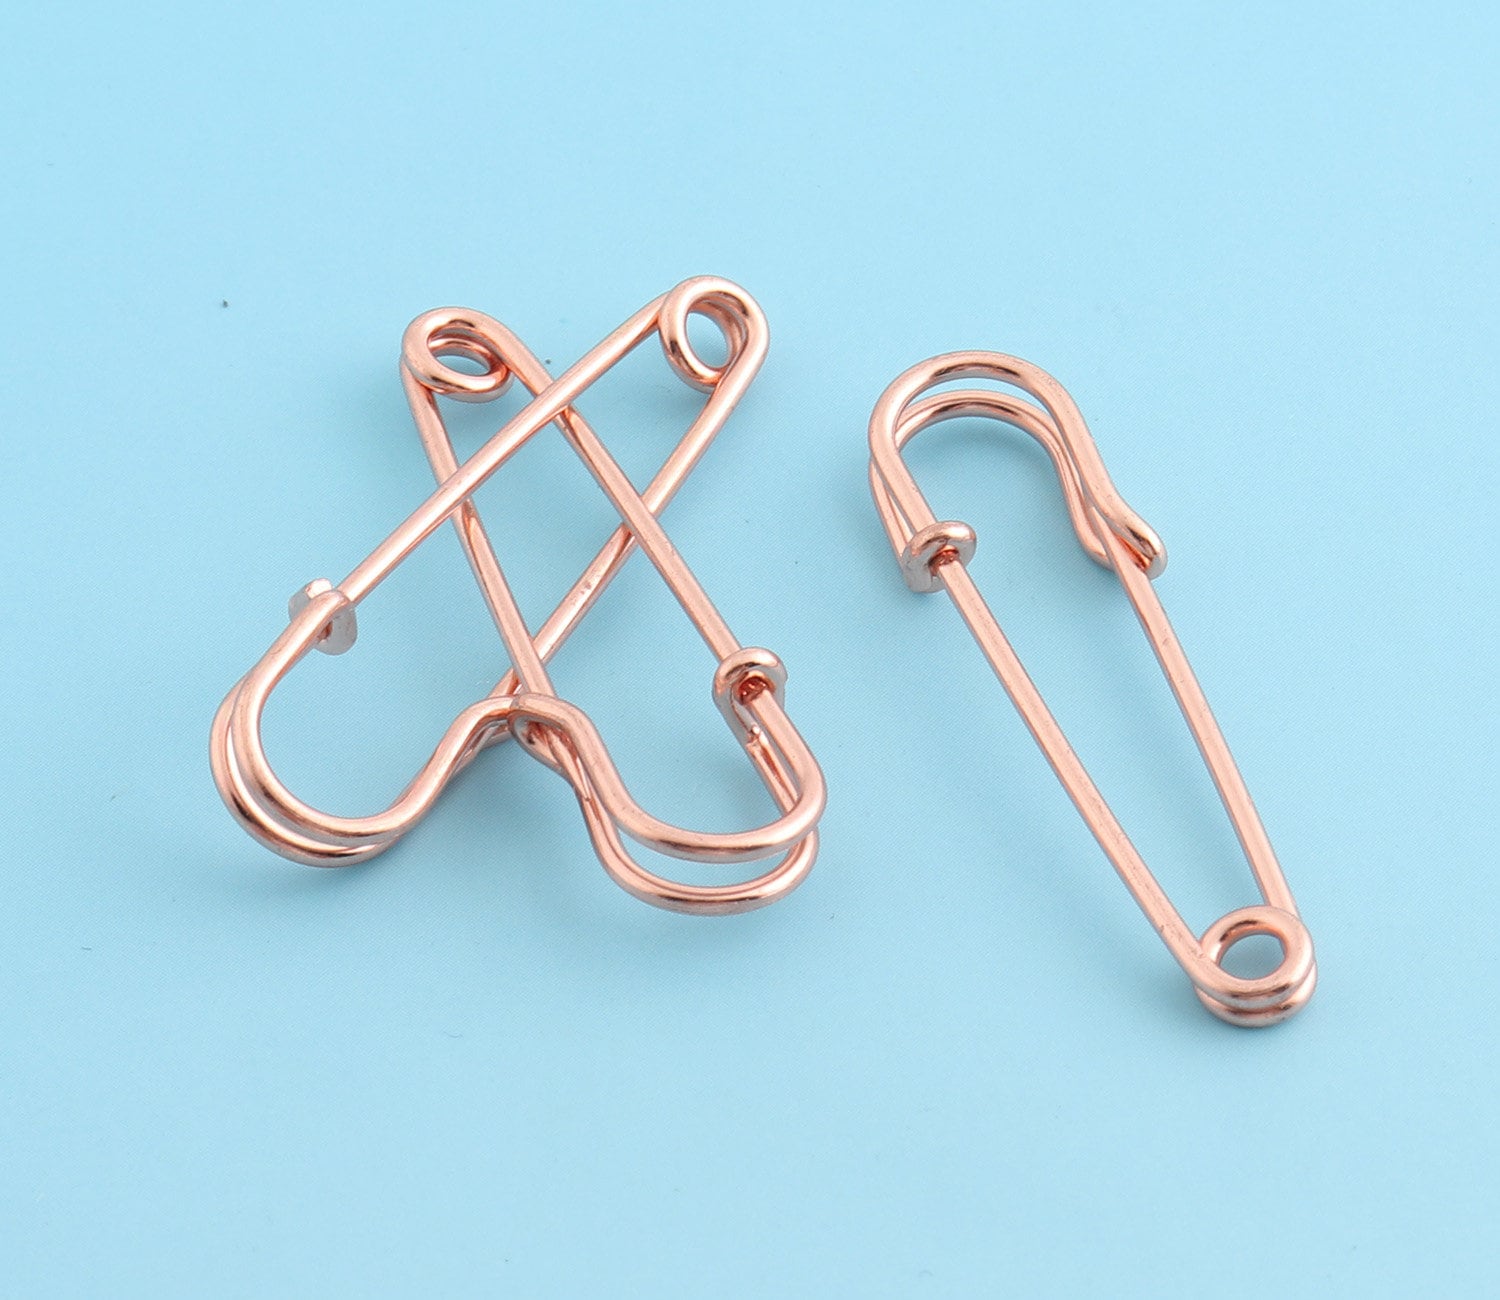 24pcs Rose Gold Small Safety Pins 359mm Metal Sewing Supplies